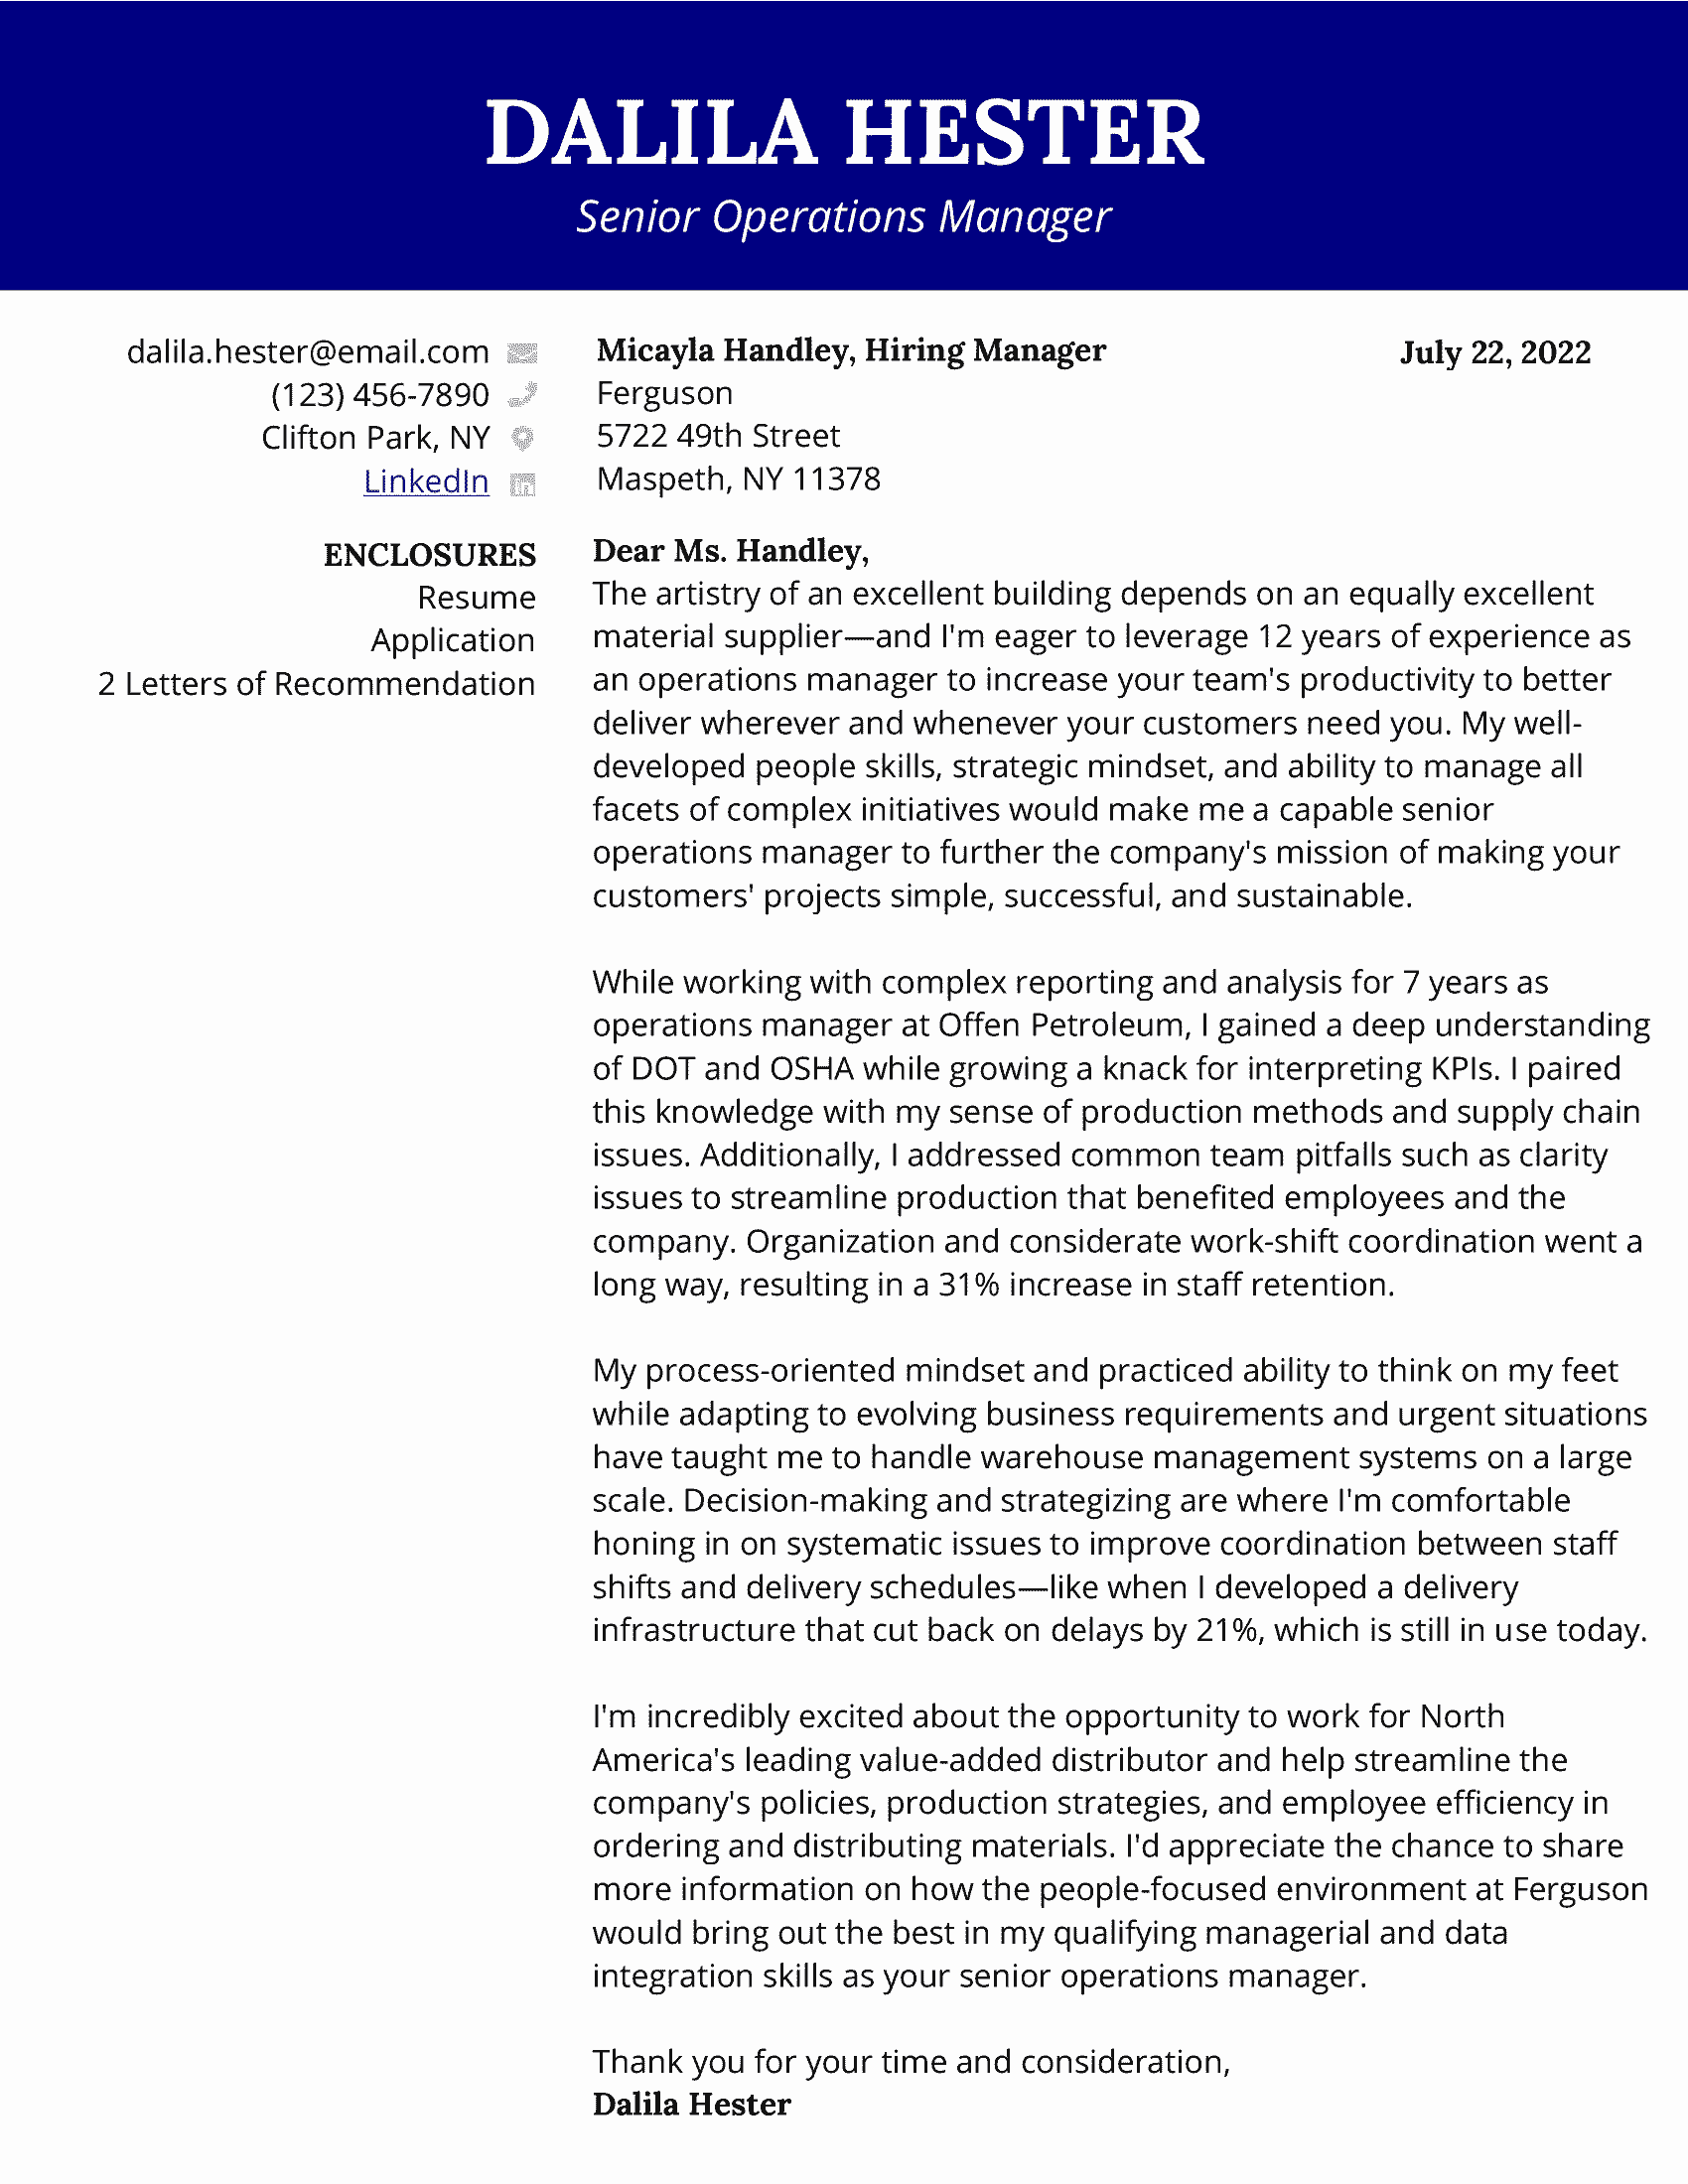 Senior operations manager cover letter example with blue contact header